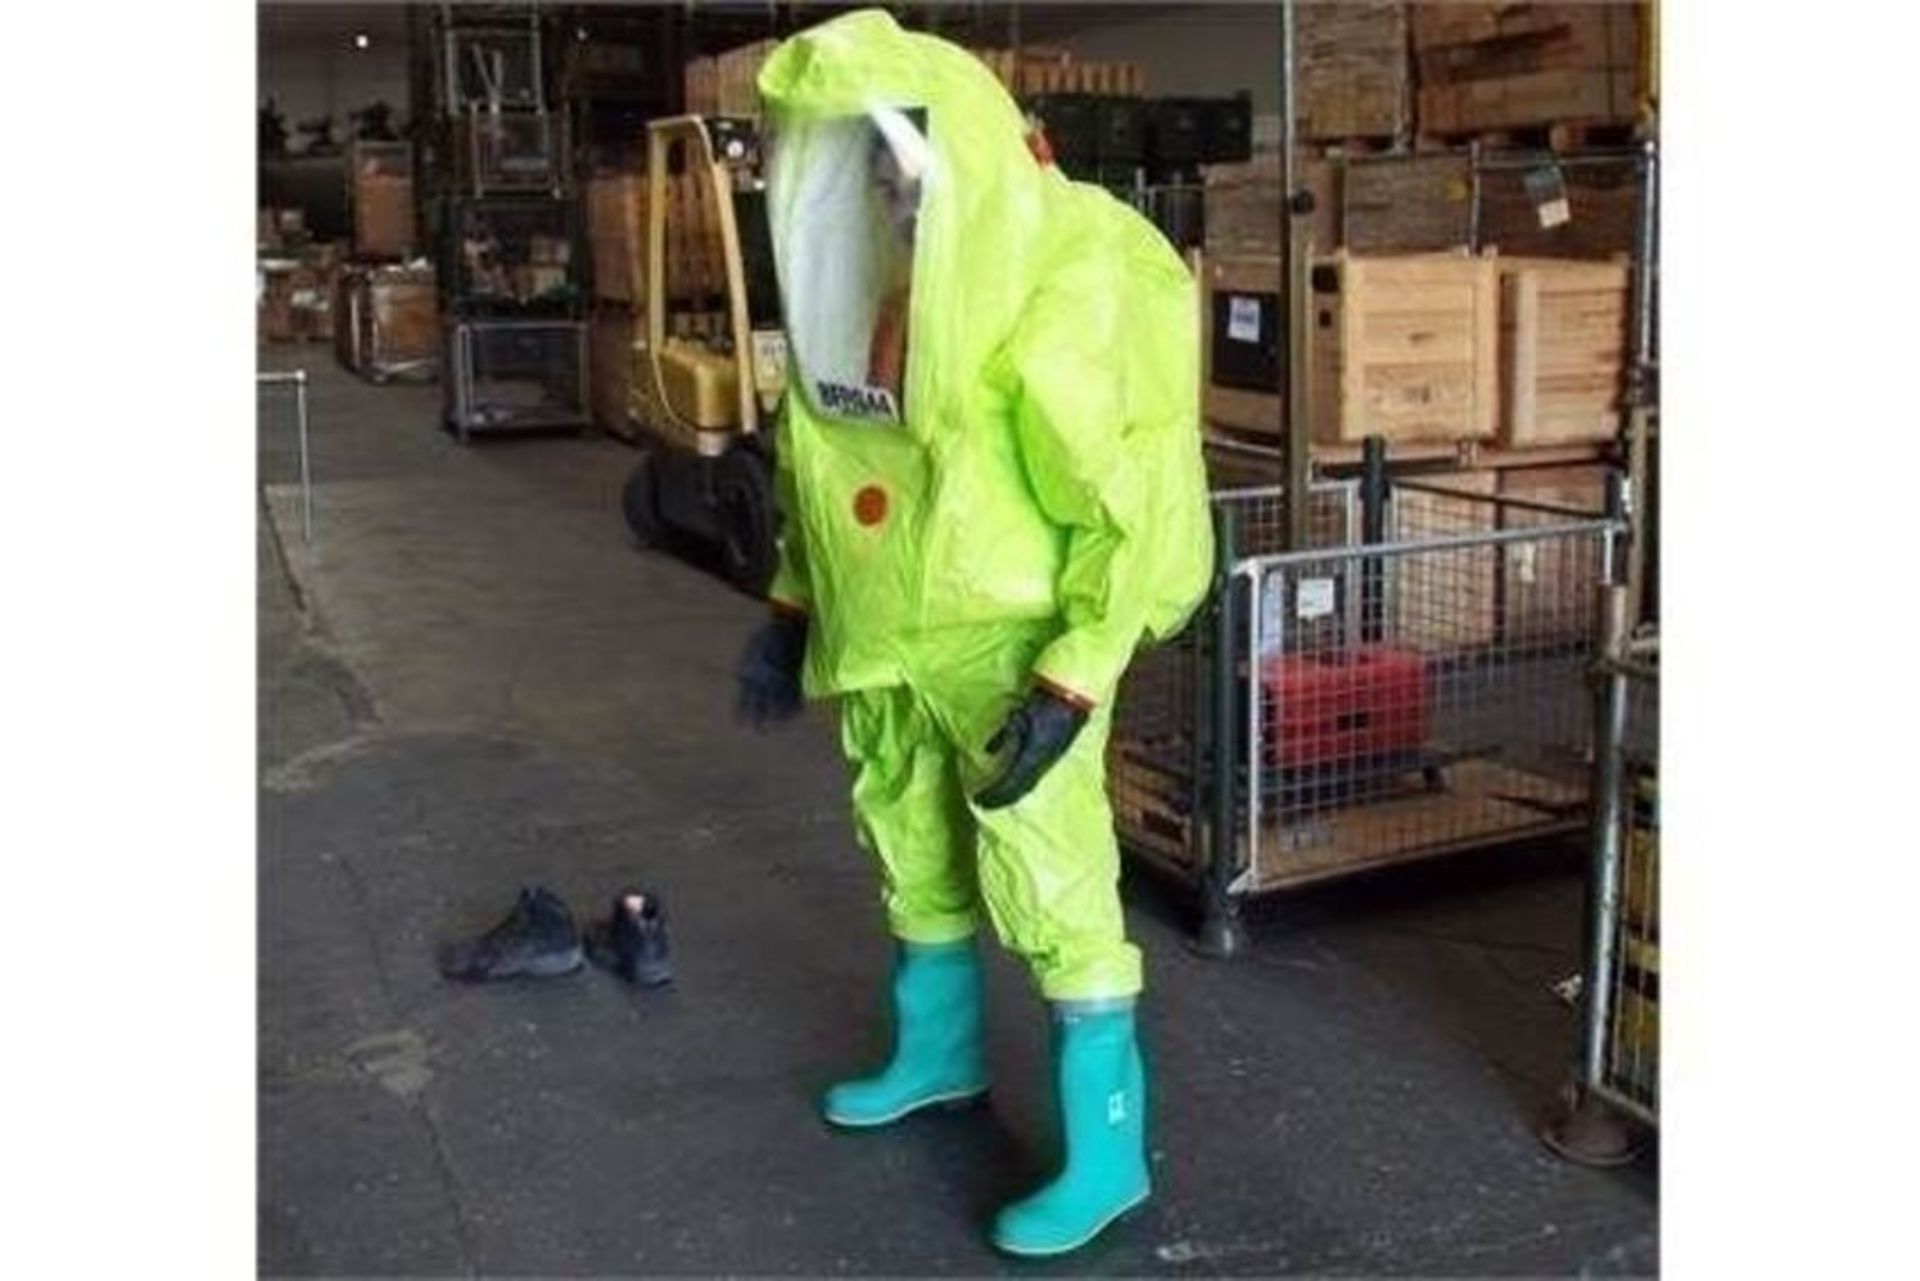 10 x Respirex Tychem TK Gas-Tight Hazmat Suit Type 1A with Attached Boots and Gloves - Image 5 of 10